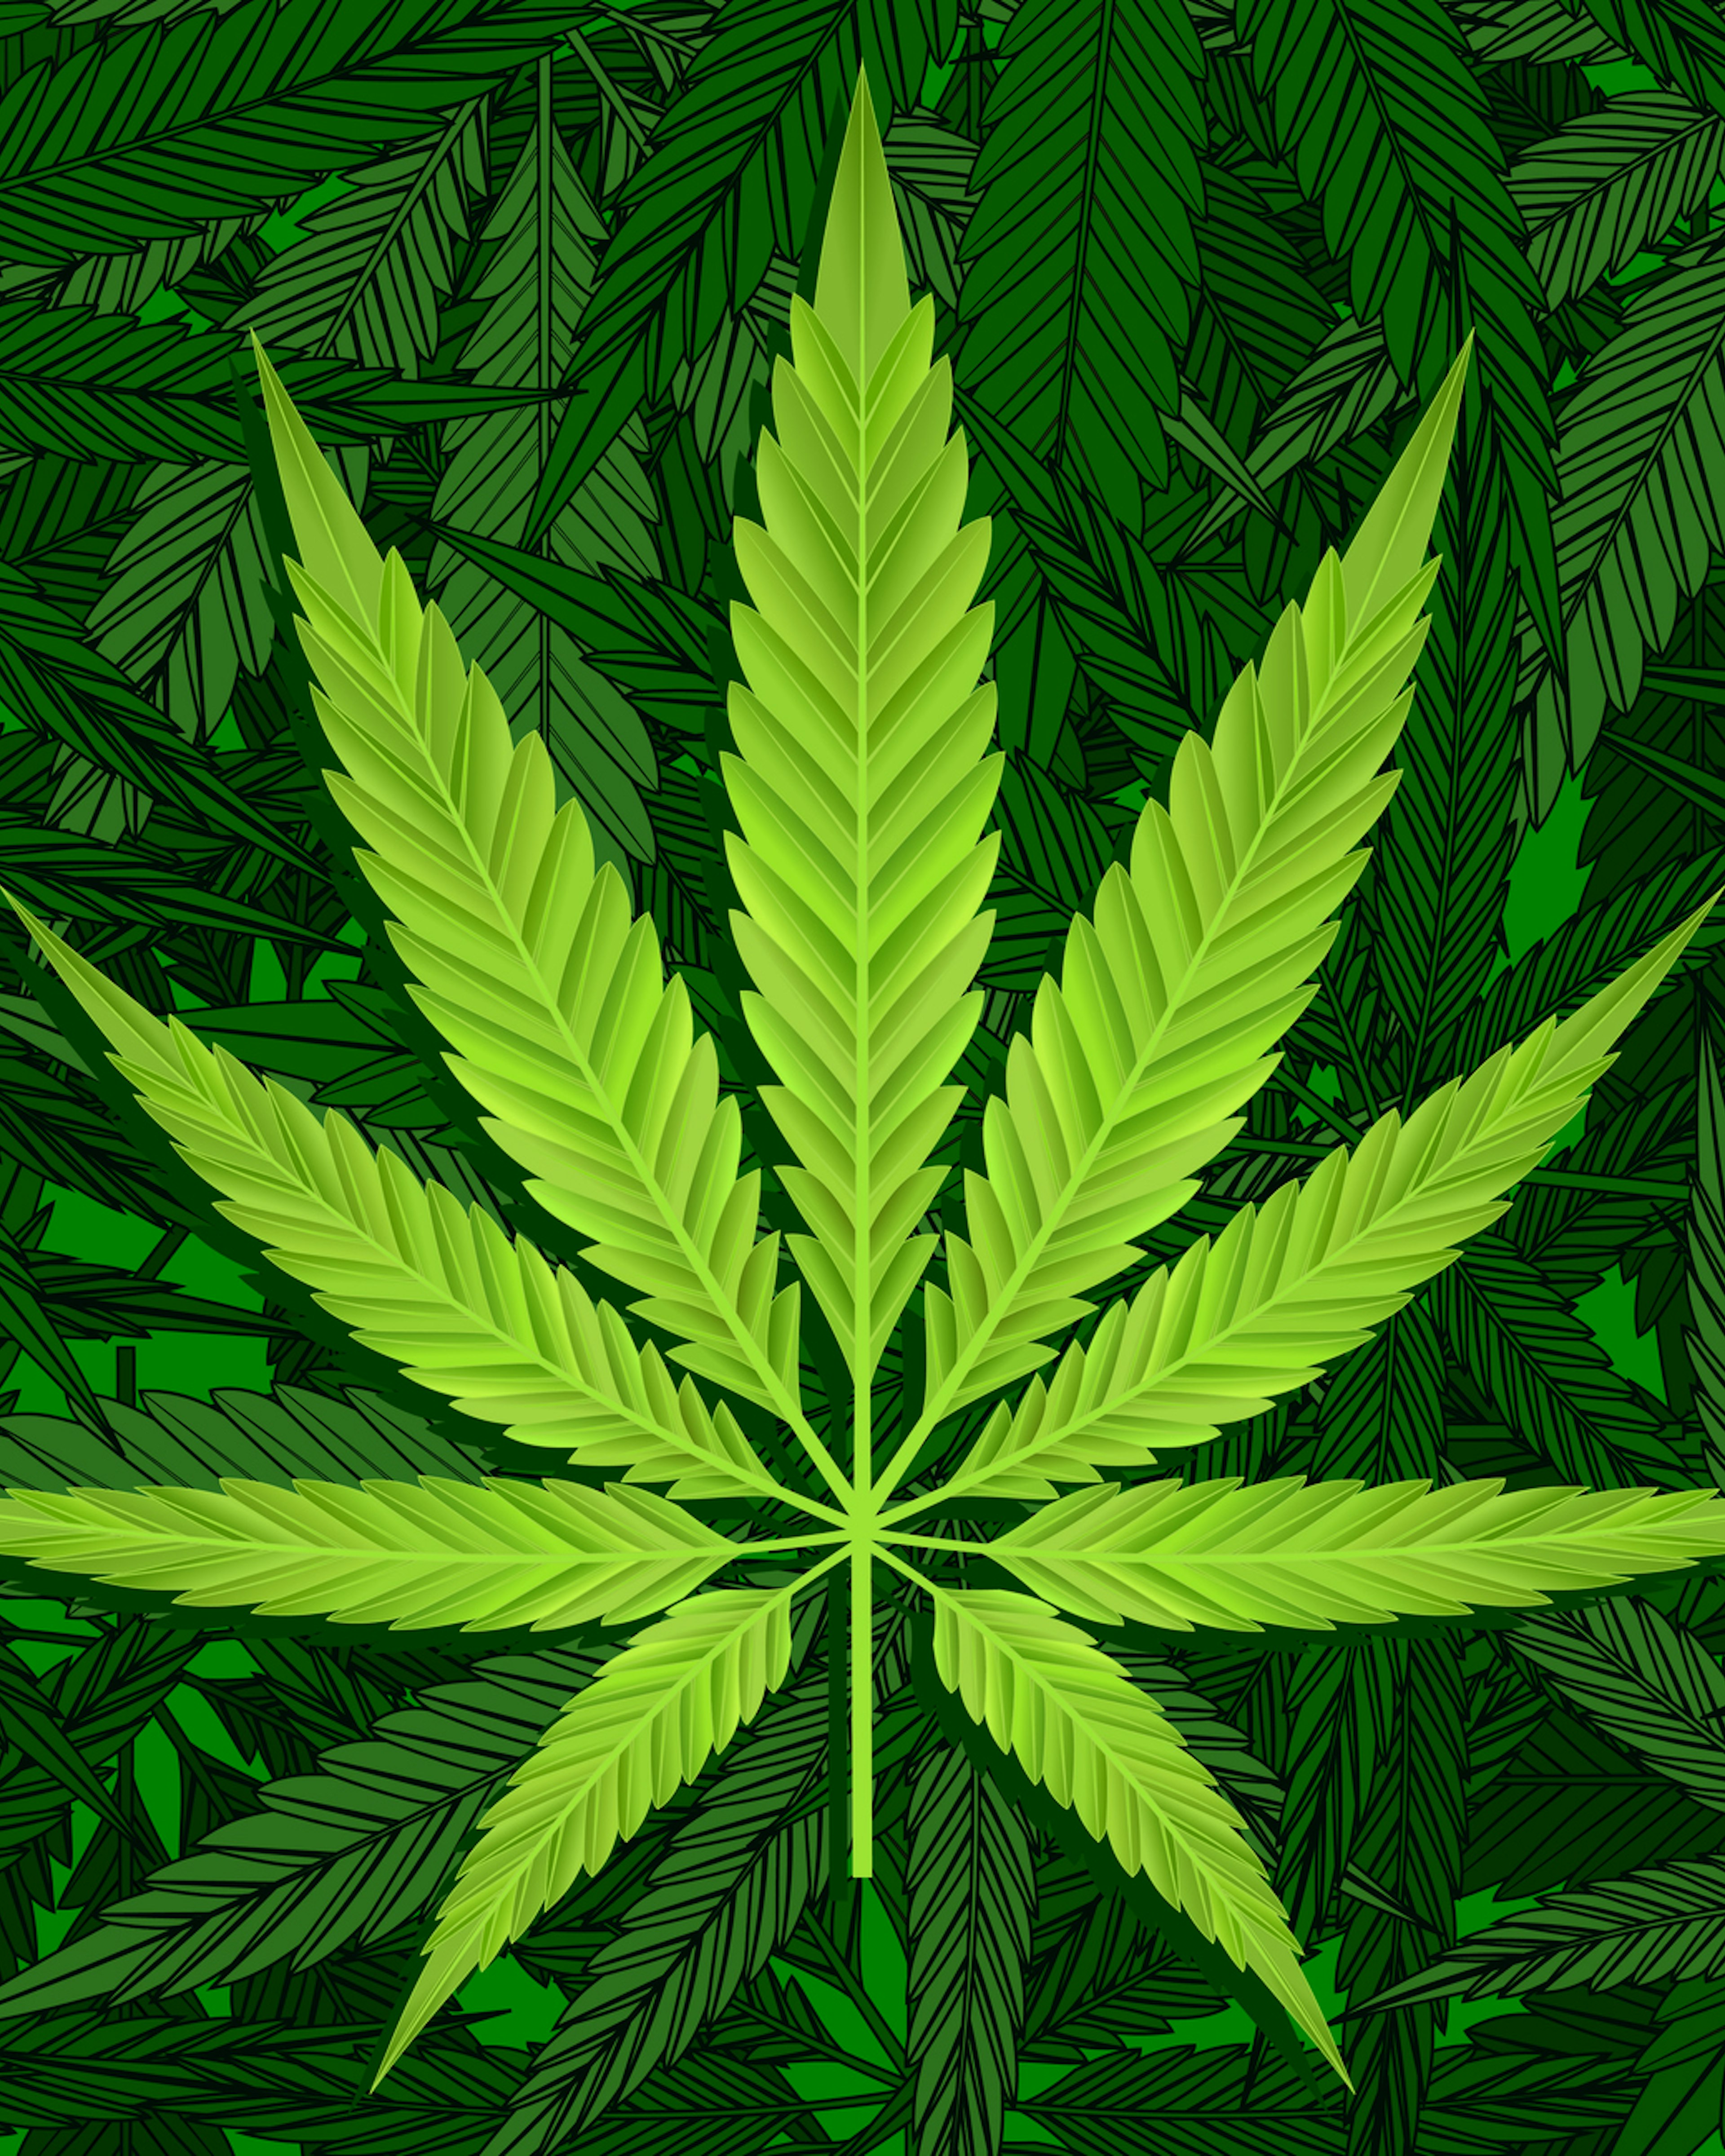 Mikhail Sokolov. Getty Images. Green cannabis leaves pattern.